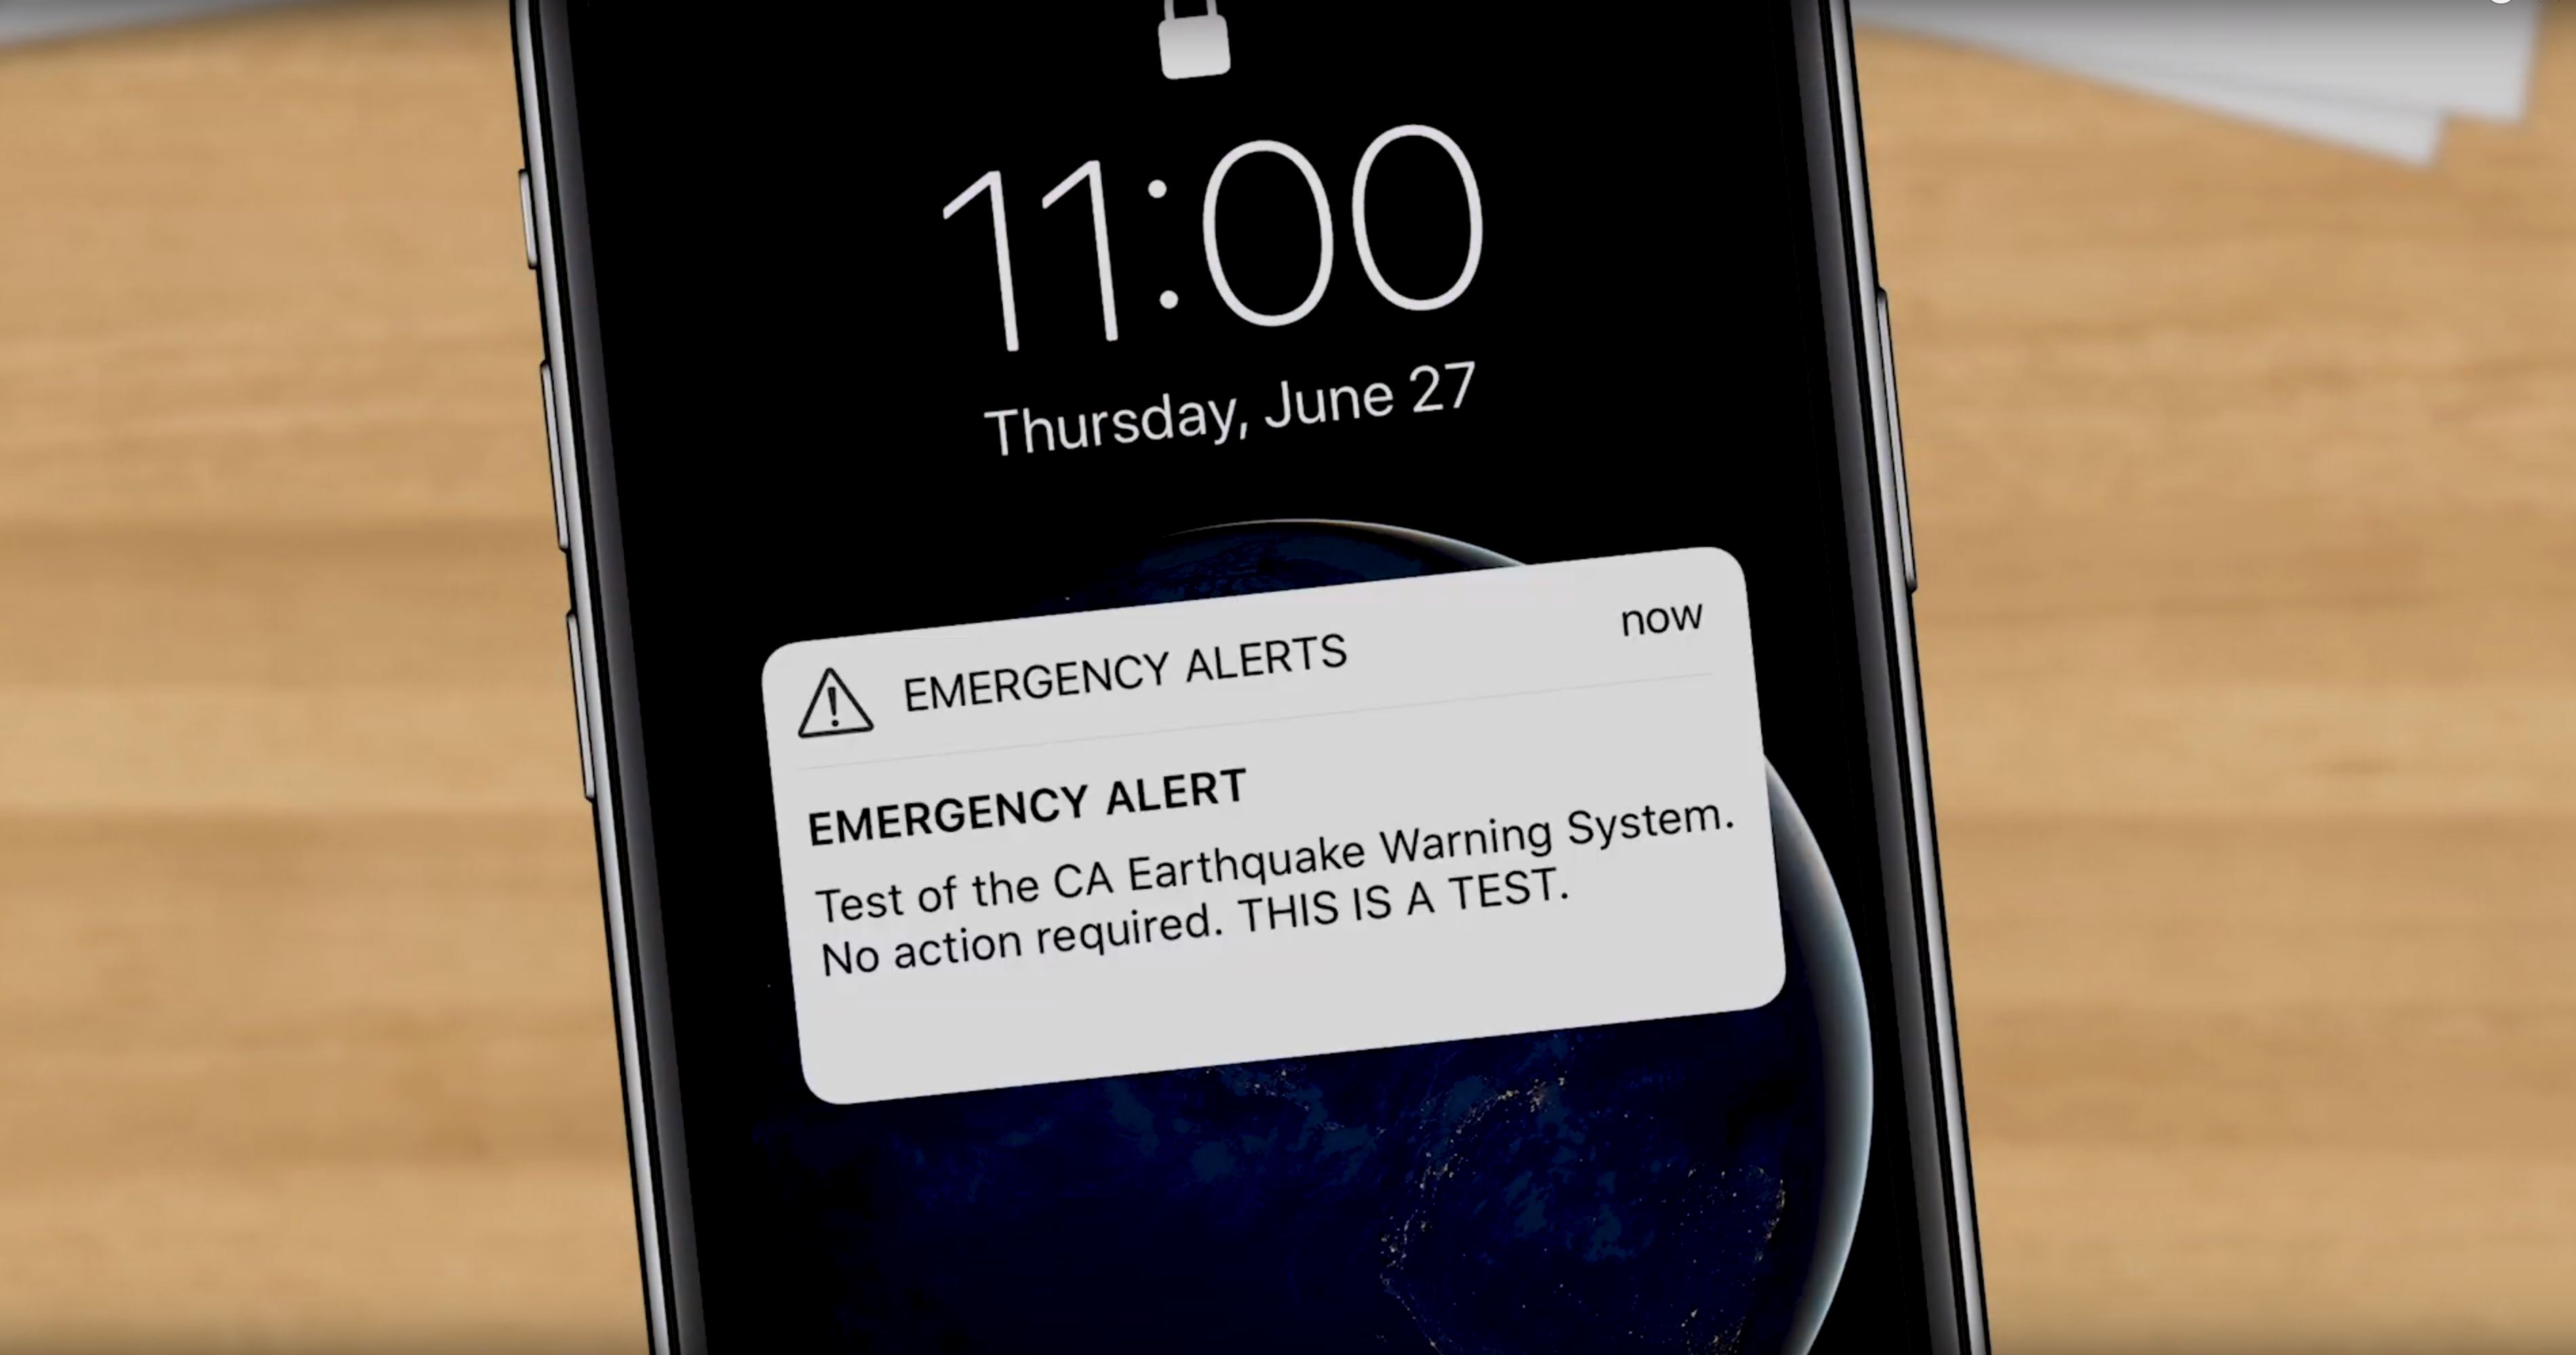 County to Use Wireless Emergency Alert to Test Earthquake Warning